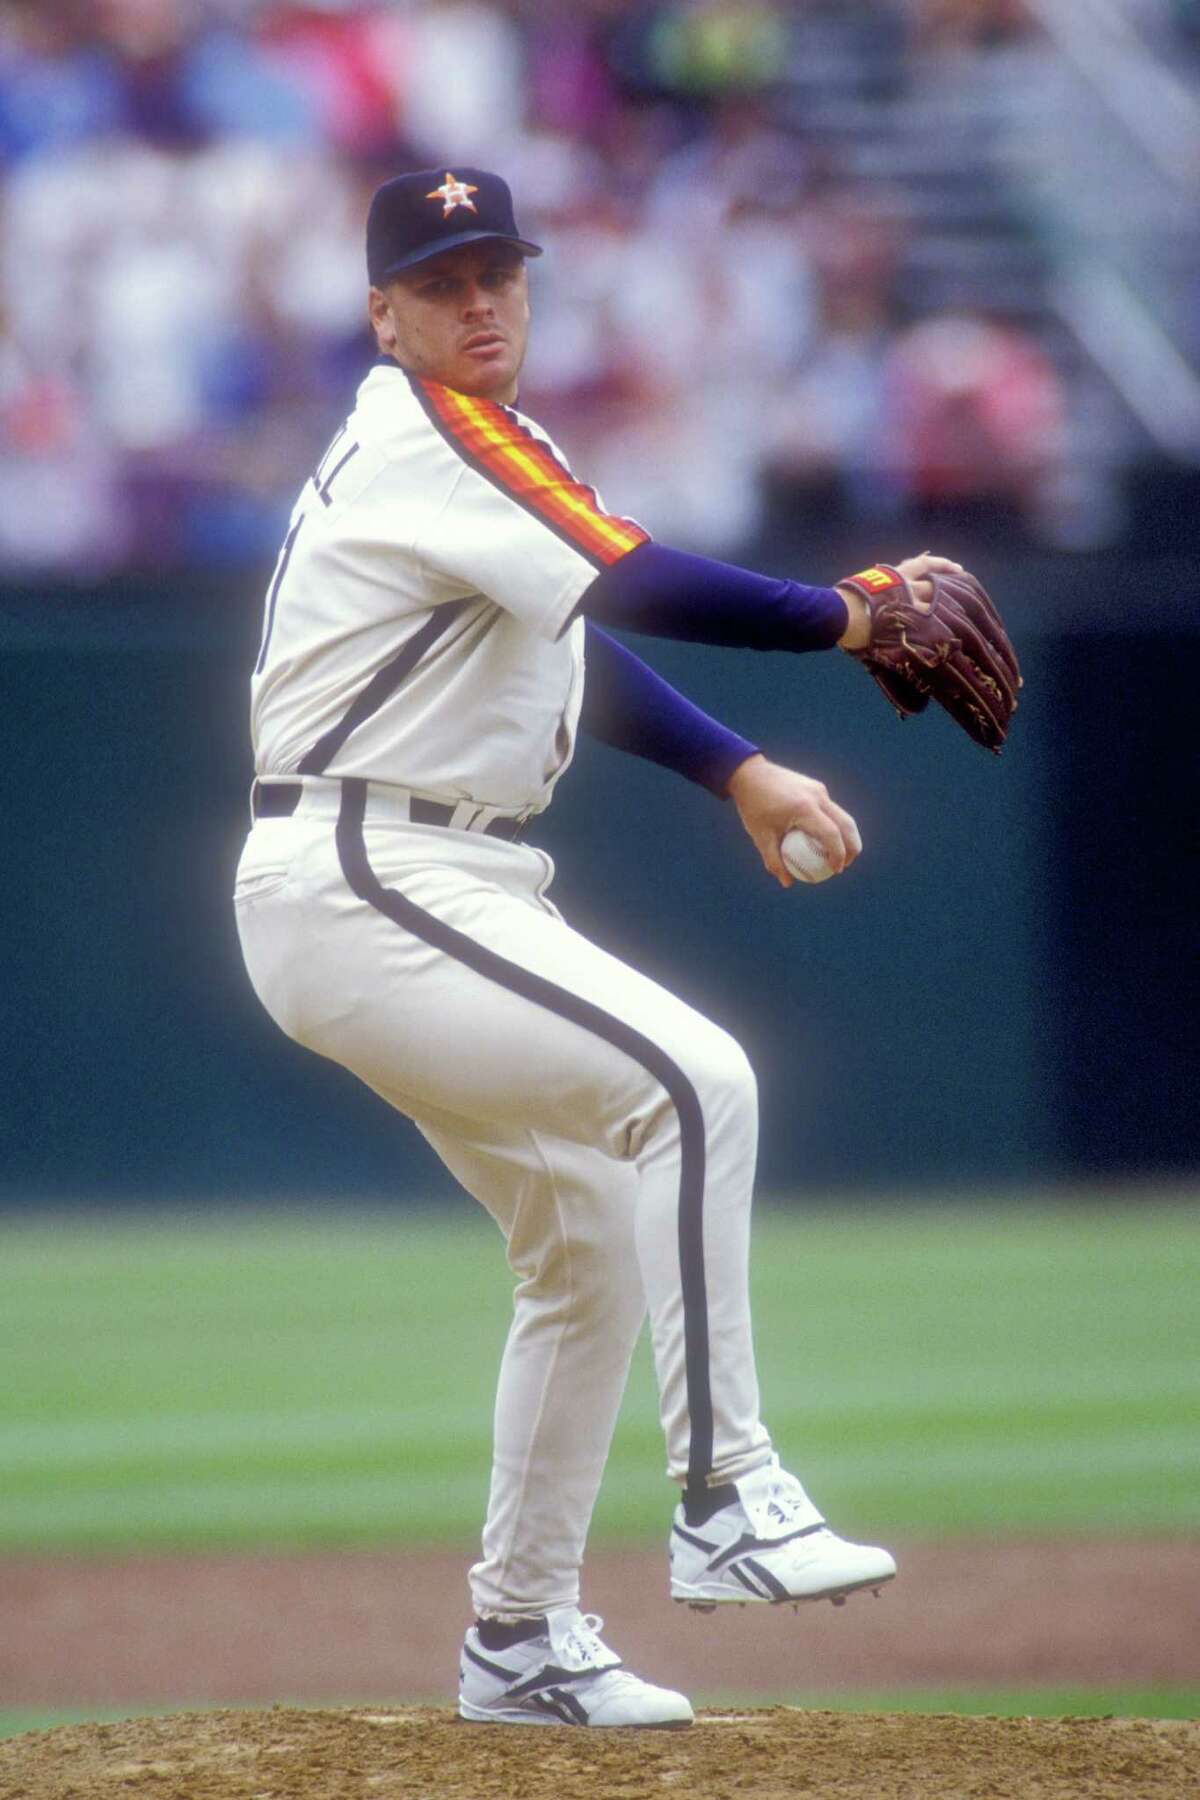 Greg Swindell, 1993-96 The former Texas Longhorns great was a heralded free-agent signing and turned in four middling Astros seasons, going 30-34 with a 4.48 ERA.